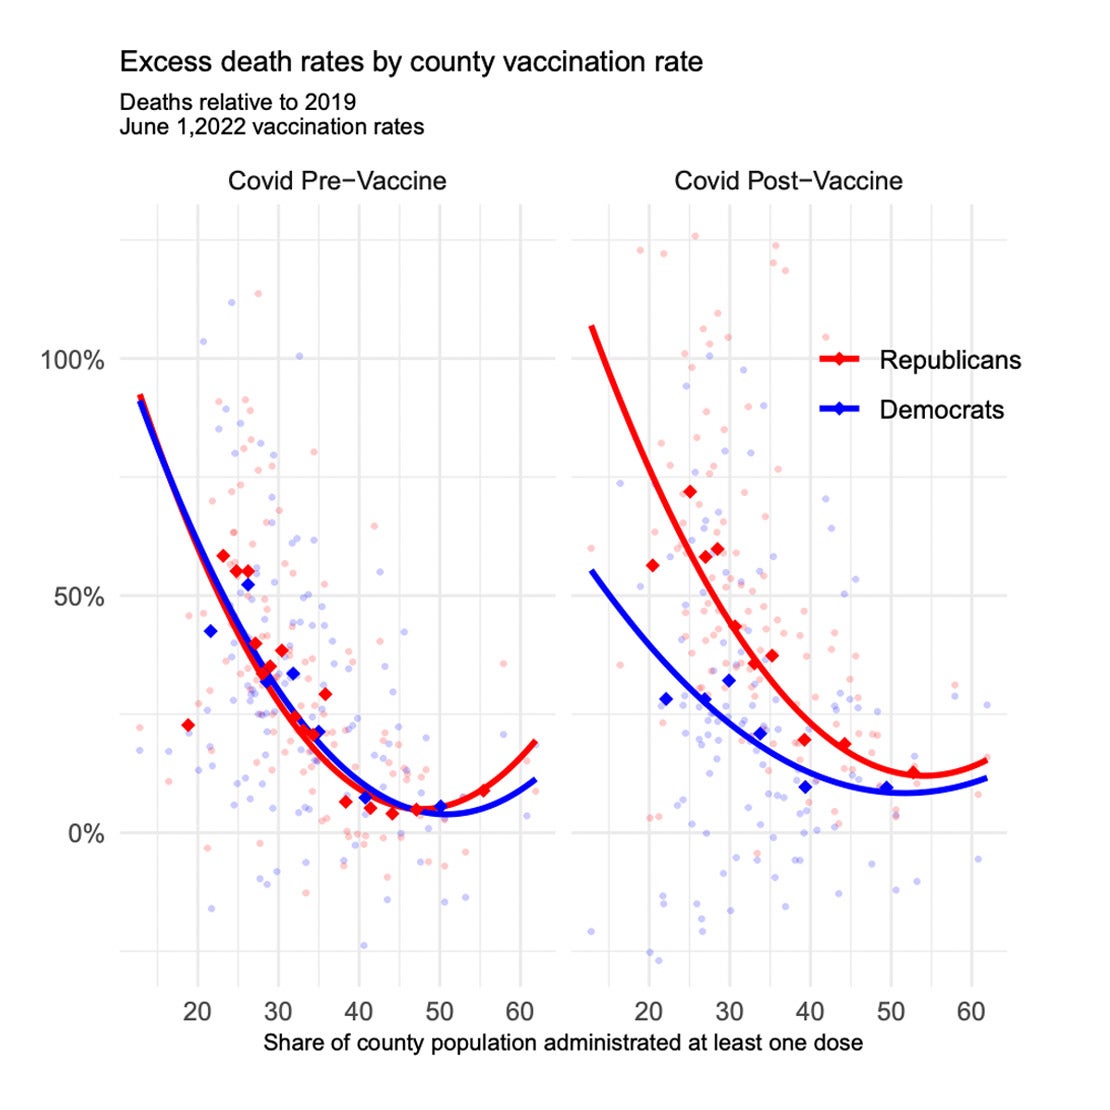 Excess U.S. death rates by county vaccination rate relative to 2019, before and after vaccine availability. The graph shows average excess death rates for Republicans and Democrats in each county for Covid Pre-Vaccine (April 2020 to March 2021) and Covid Post-Vaccine (April 2021-December 2021). The circles are each county, and diamonds are binned means for each party. The curves are quadratic fits using least squares. Graphic: Wallace, et al., 2022